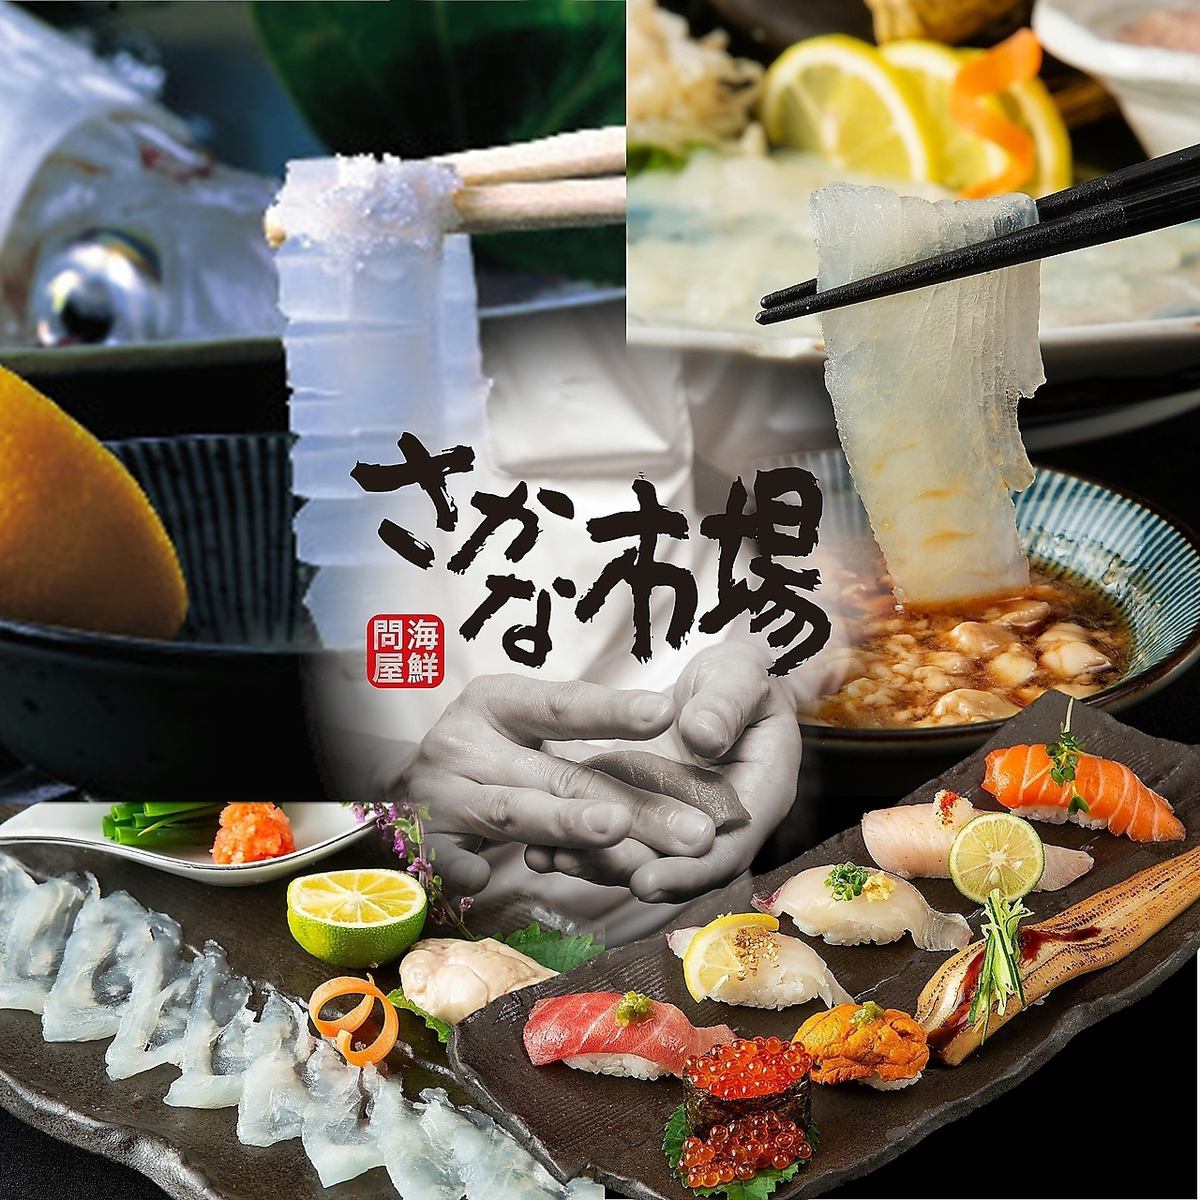 We are proud of the lively sashimi of fresh live fish pulled from the cage !! Course 3500 yen ~